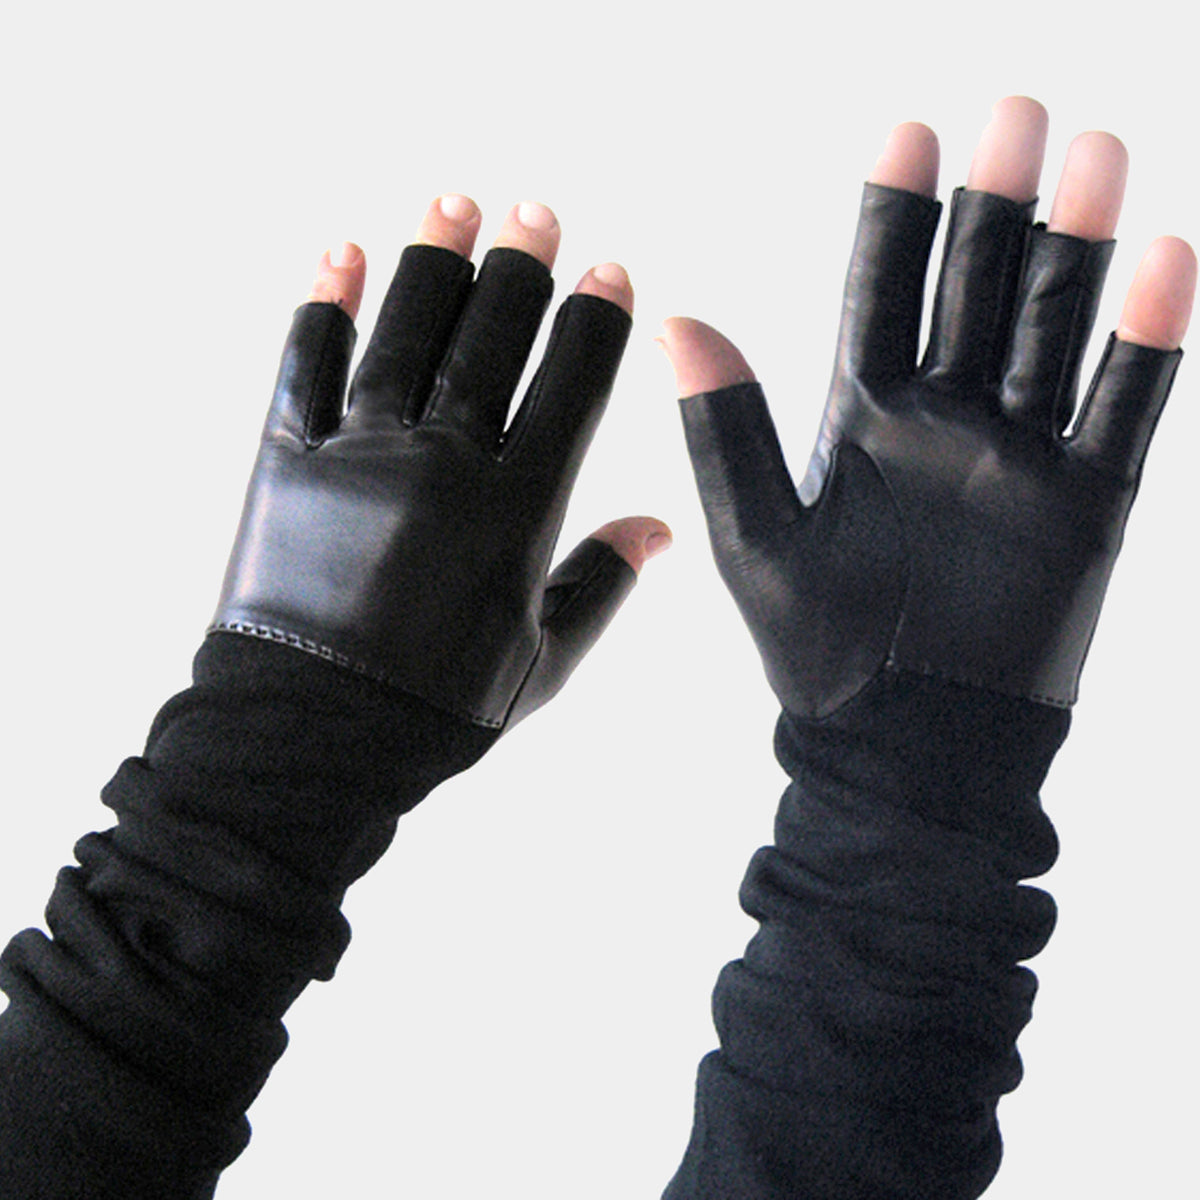 LEATHER KNIT MENS FINGERLESS AND GLOVES